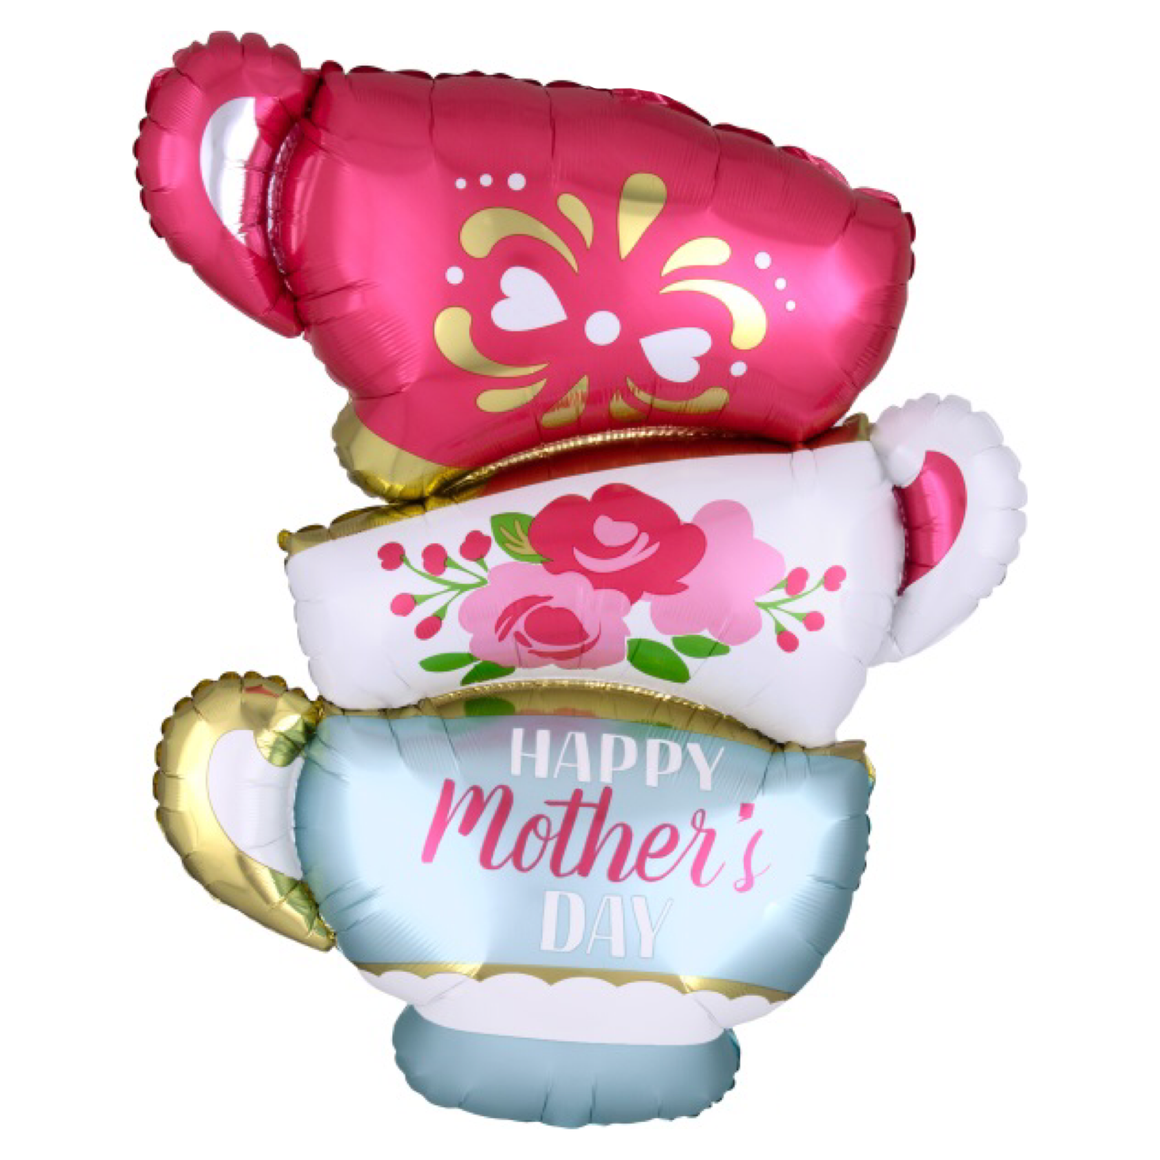 BALLOONS - MOTHER’S DAY TEACUPS